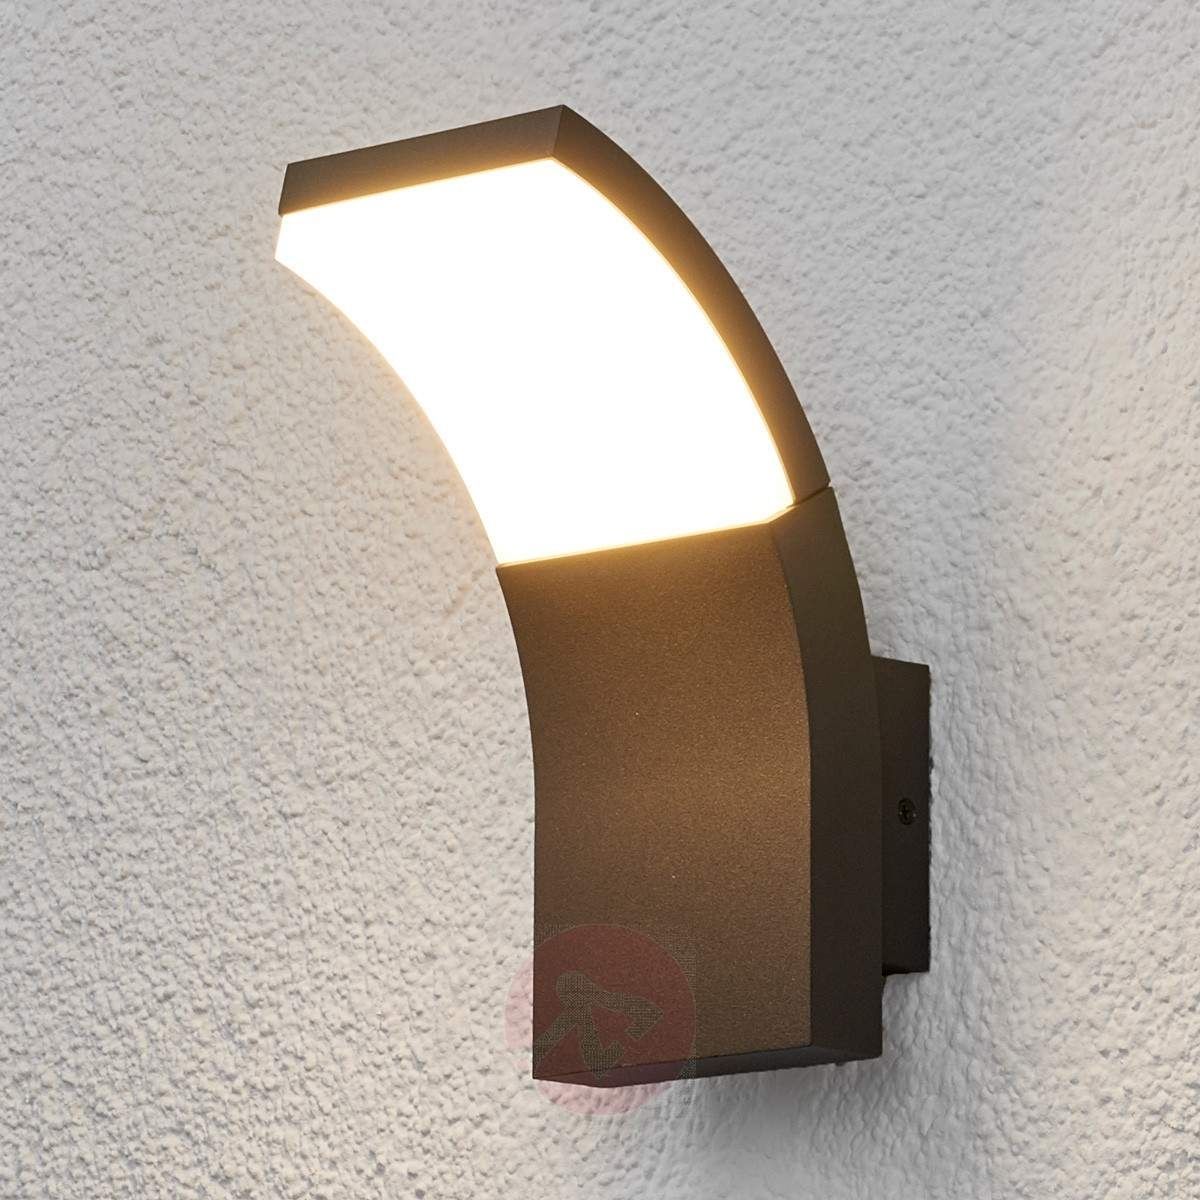 Led Outdoor Wall Light Timm Lights Co Uk Brilliant Led In 4 Within Outdoor Wall Spotlights (View 11 of 15)